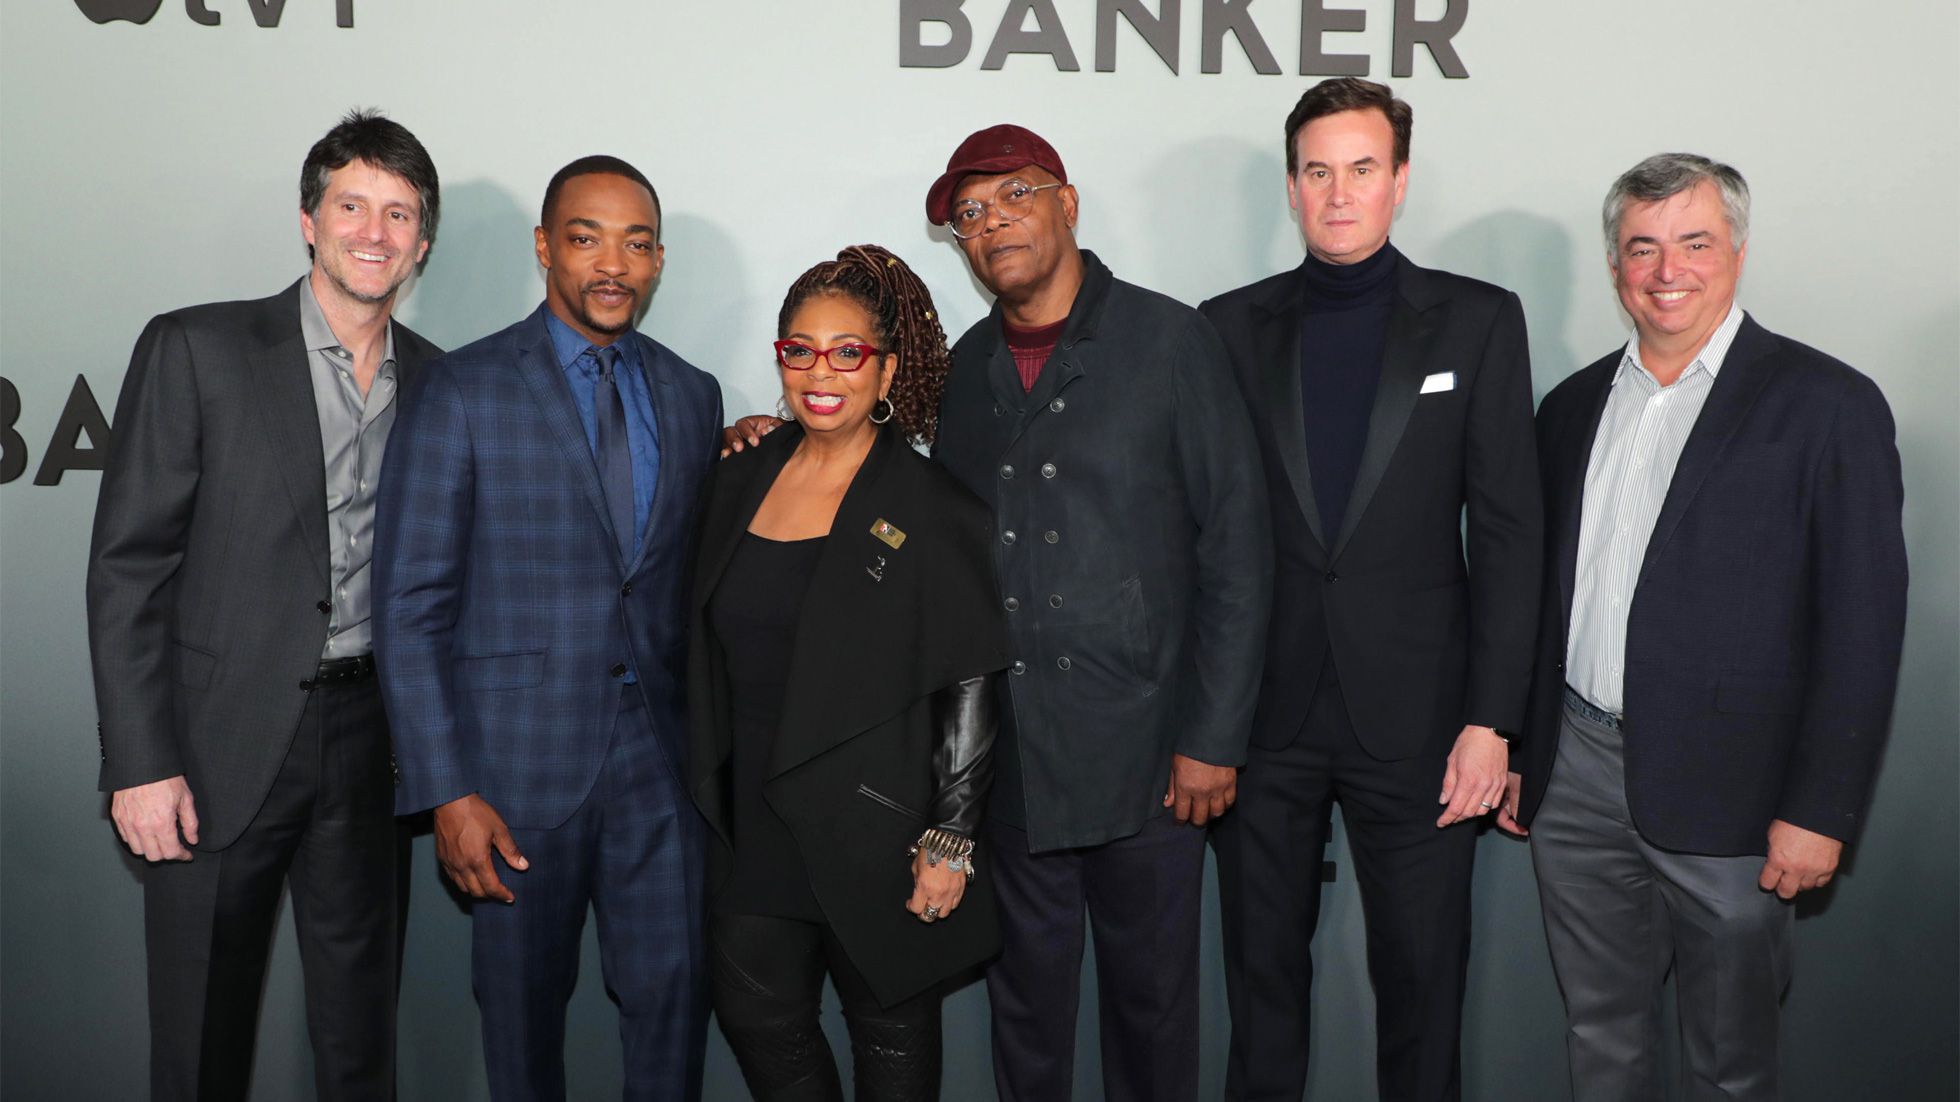 The Banker' Film Premieres at National Civil Rights Museum Ahead of March 20 Debut on Apple TV+